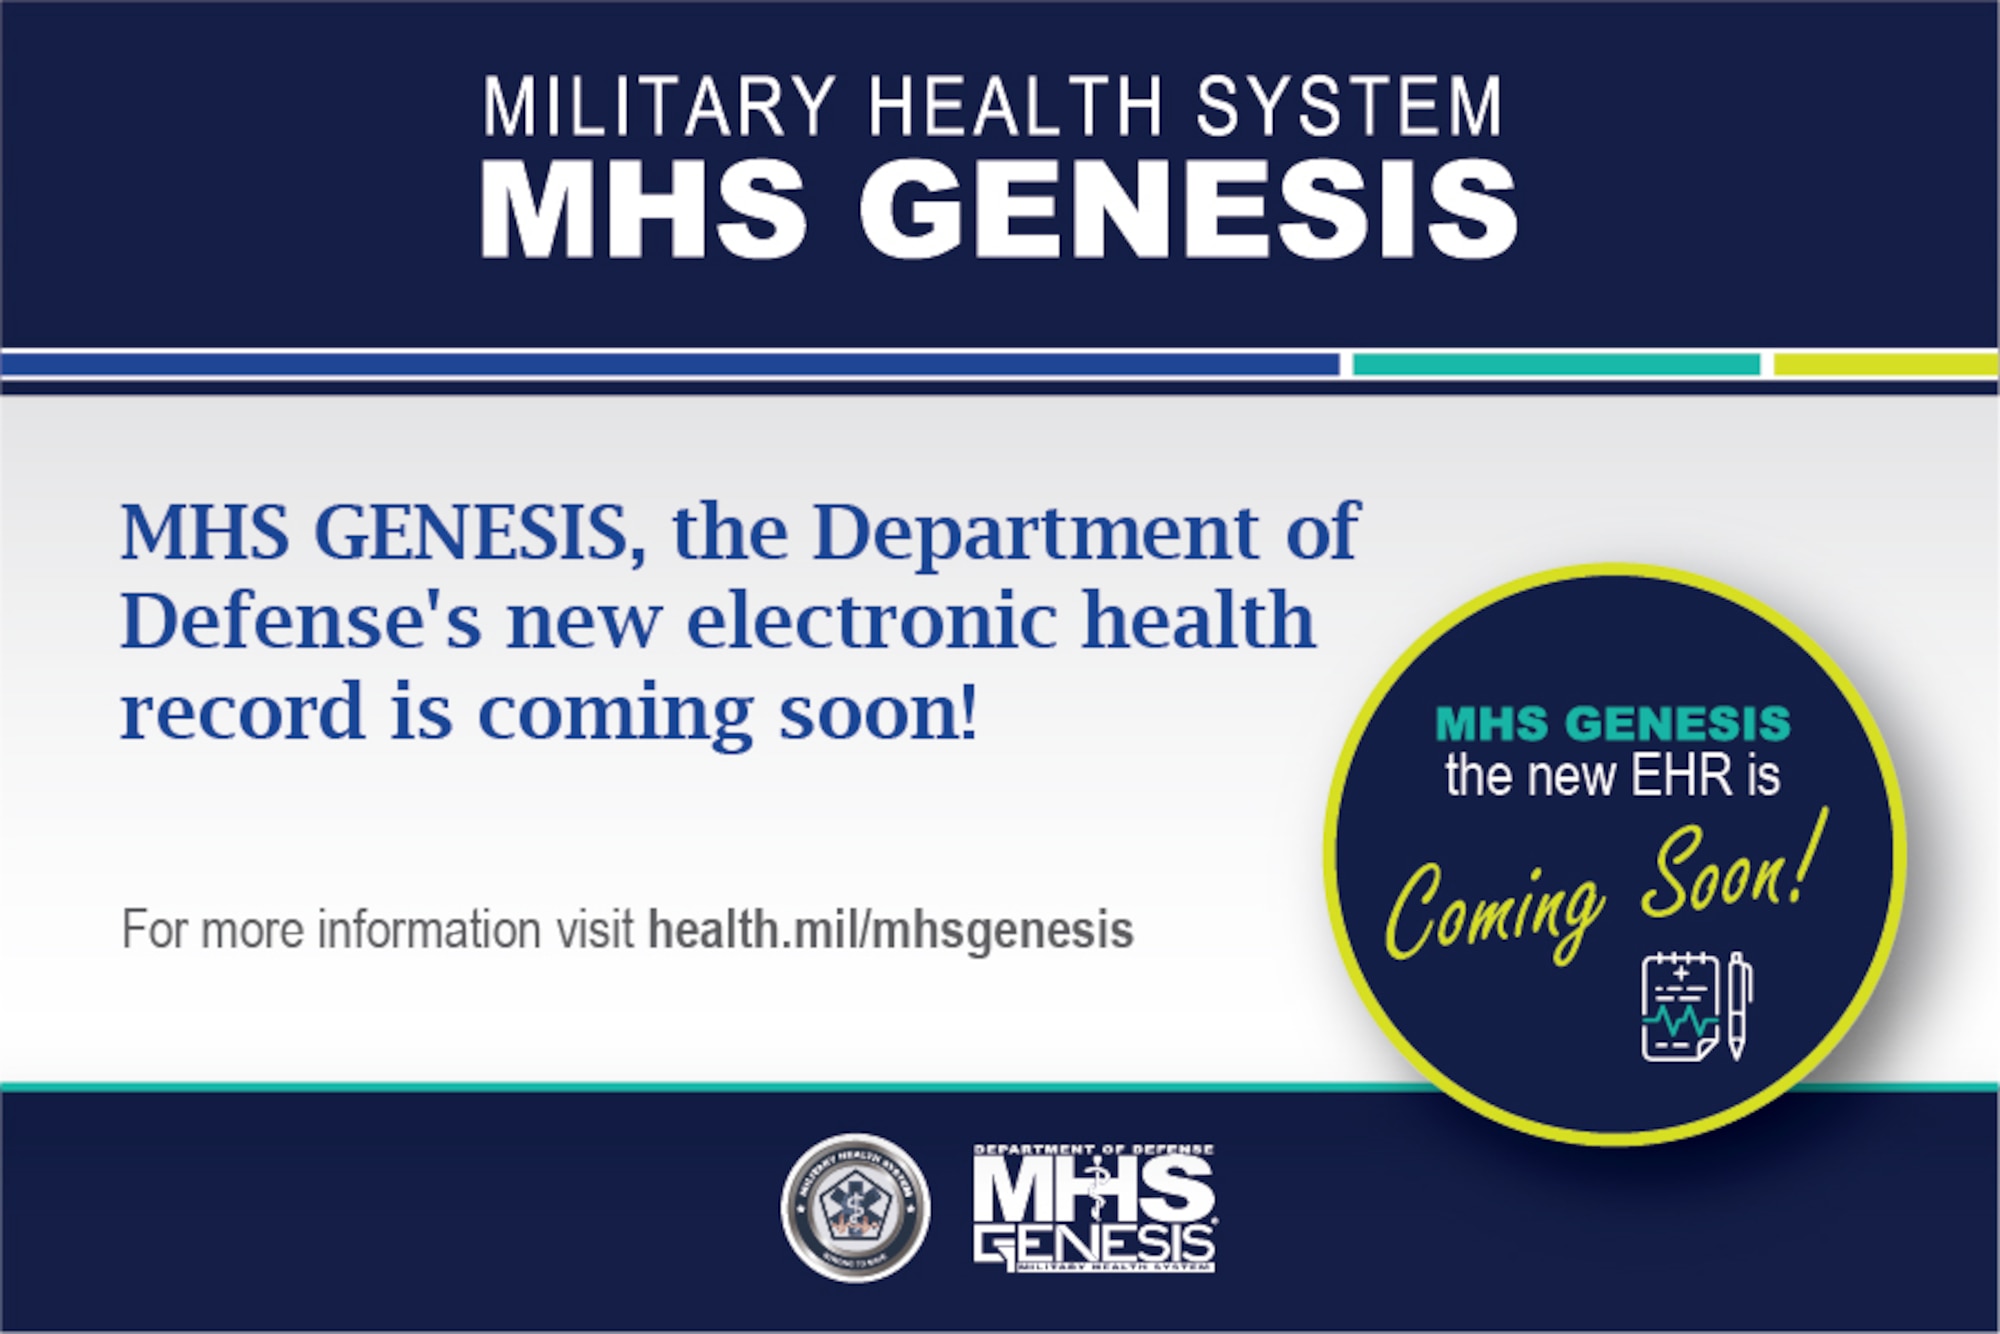 Graphic talking about MHS Genesis launch